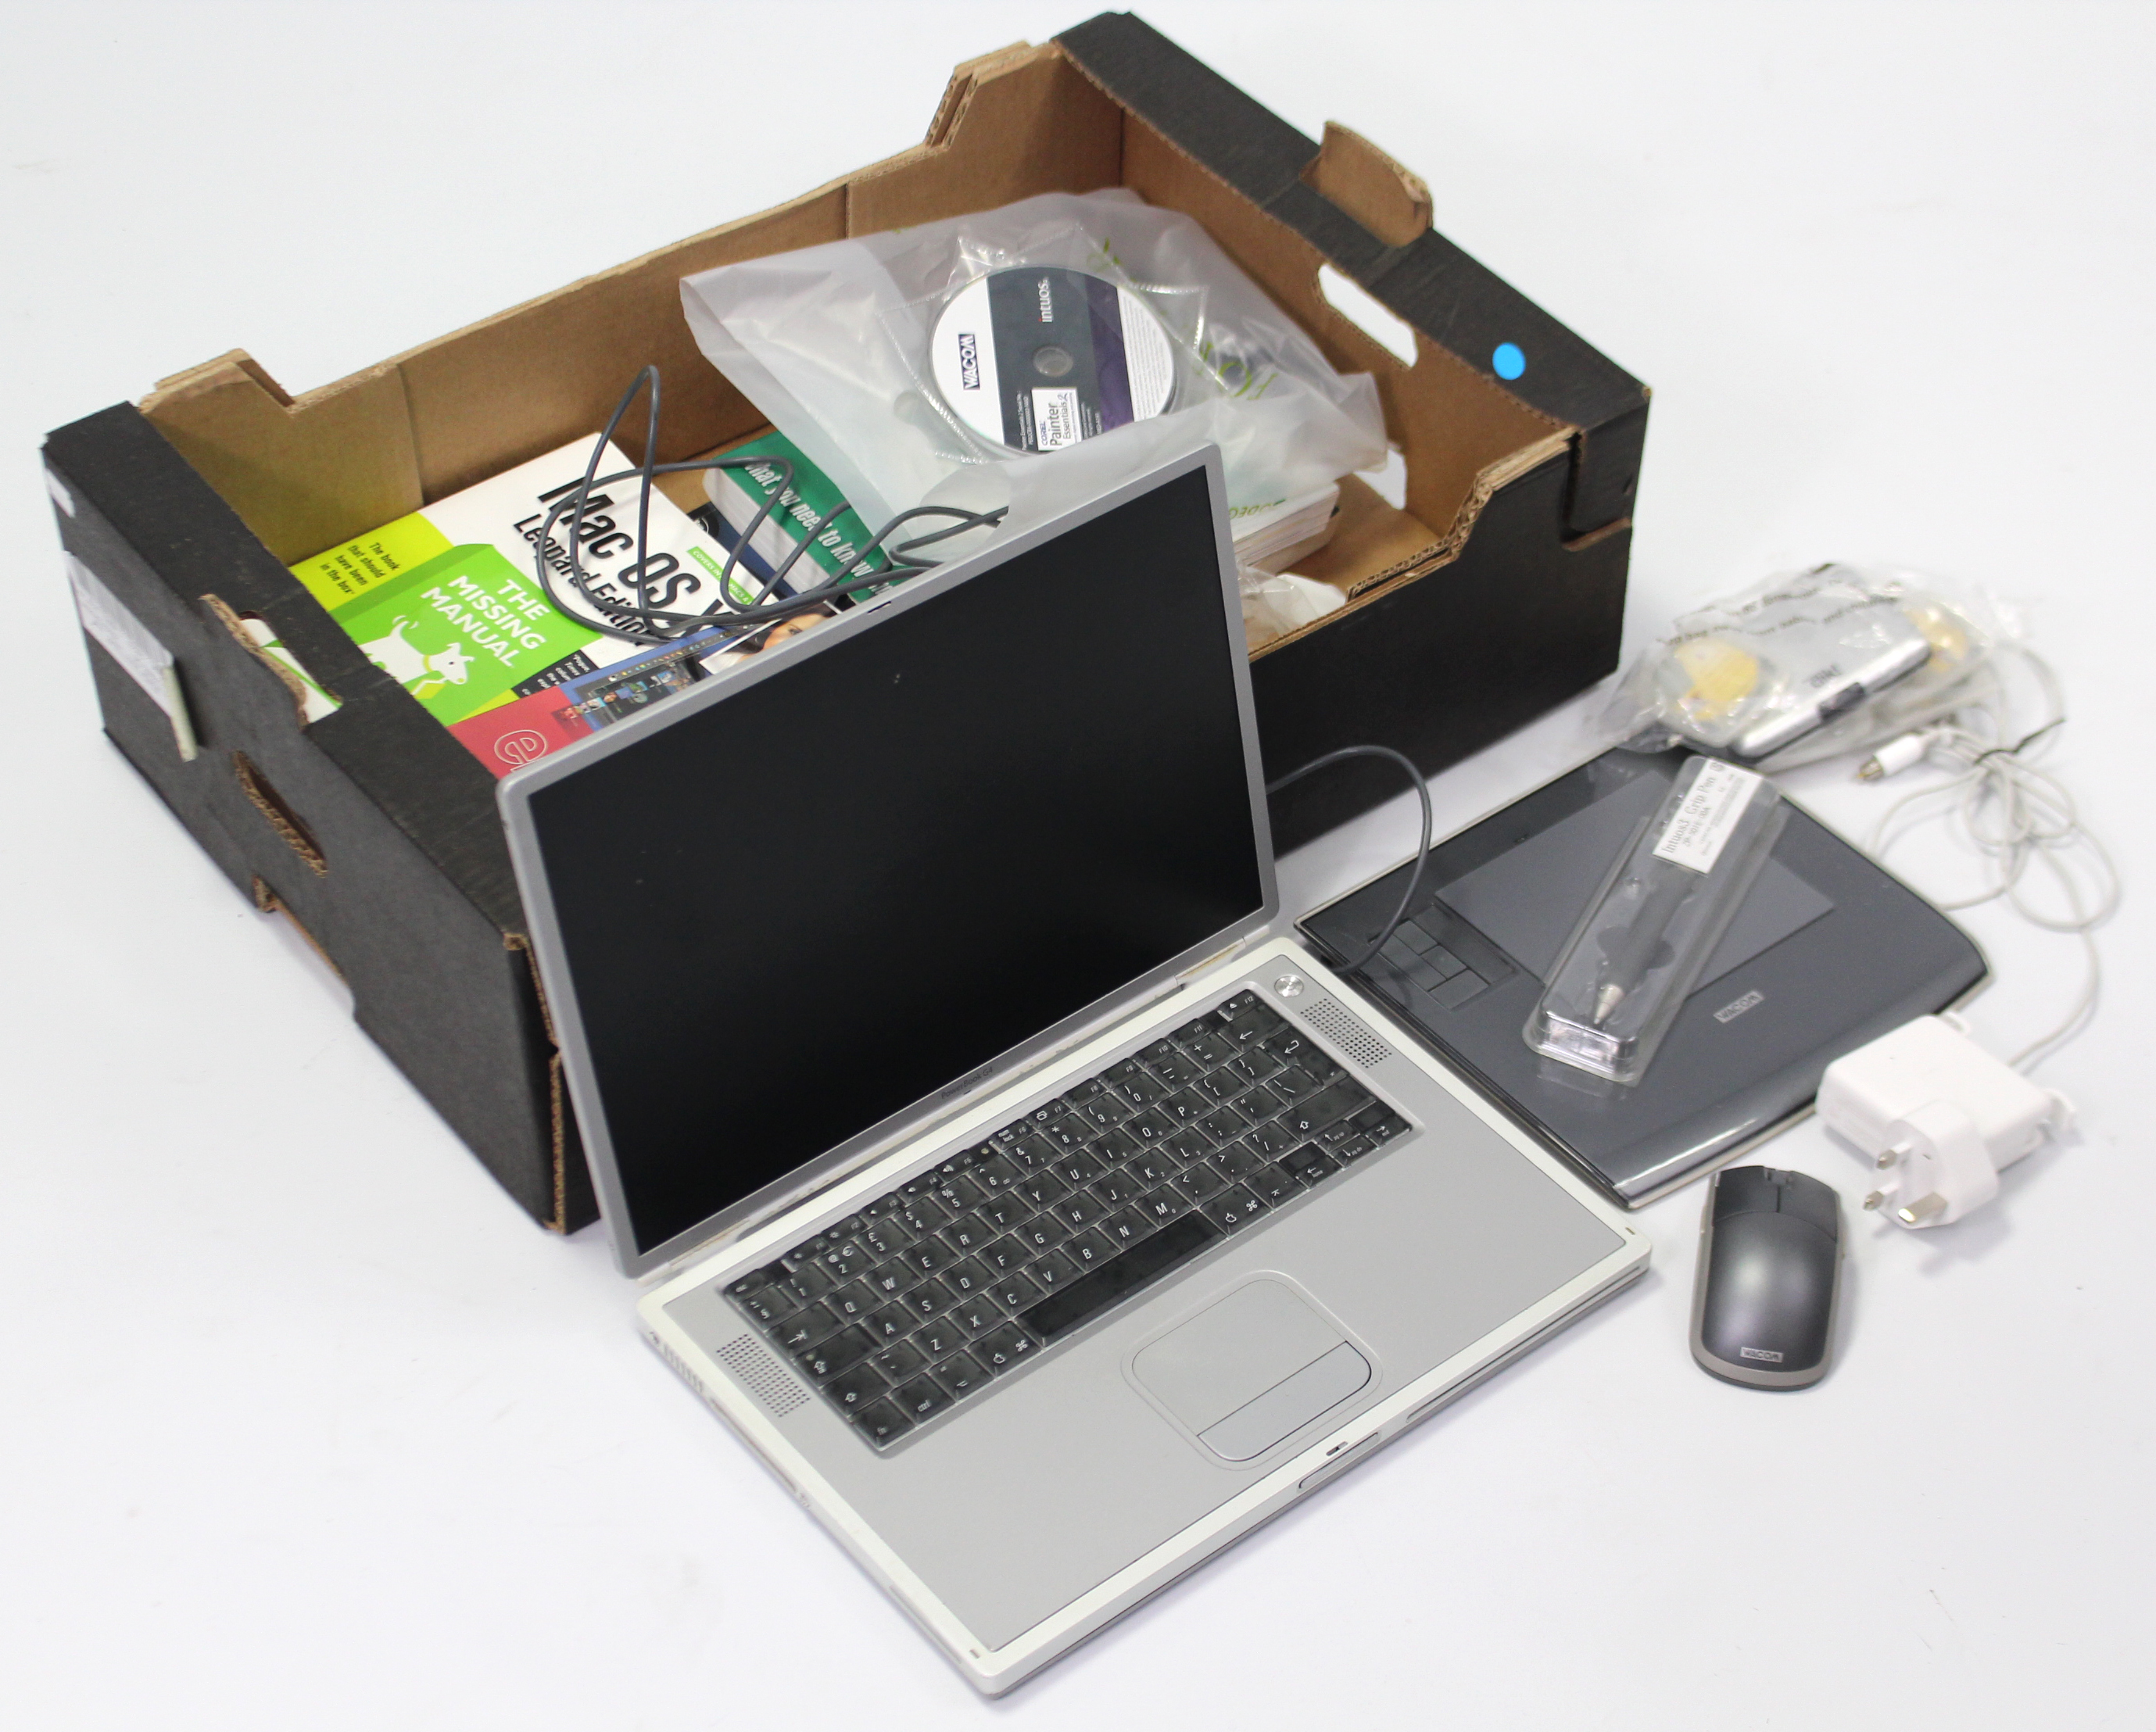 An Apple Mac laptop with various accessories